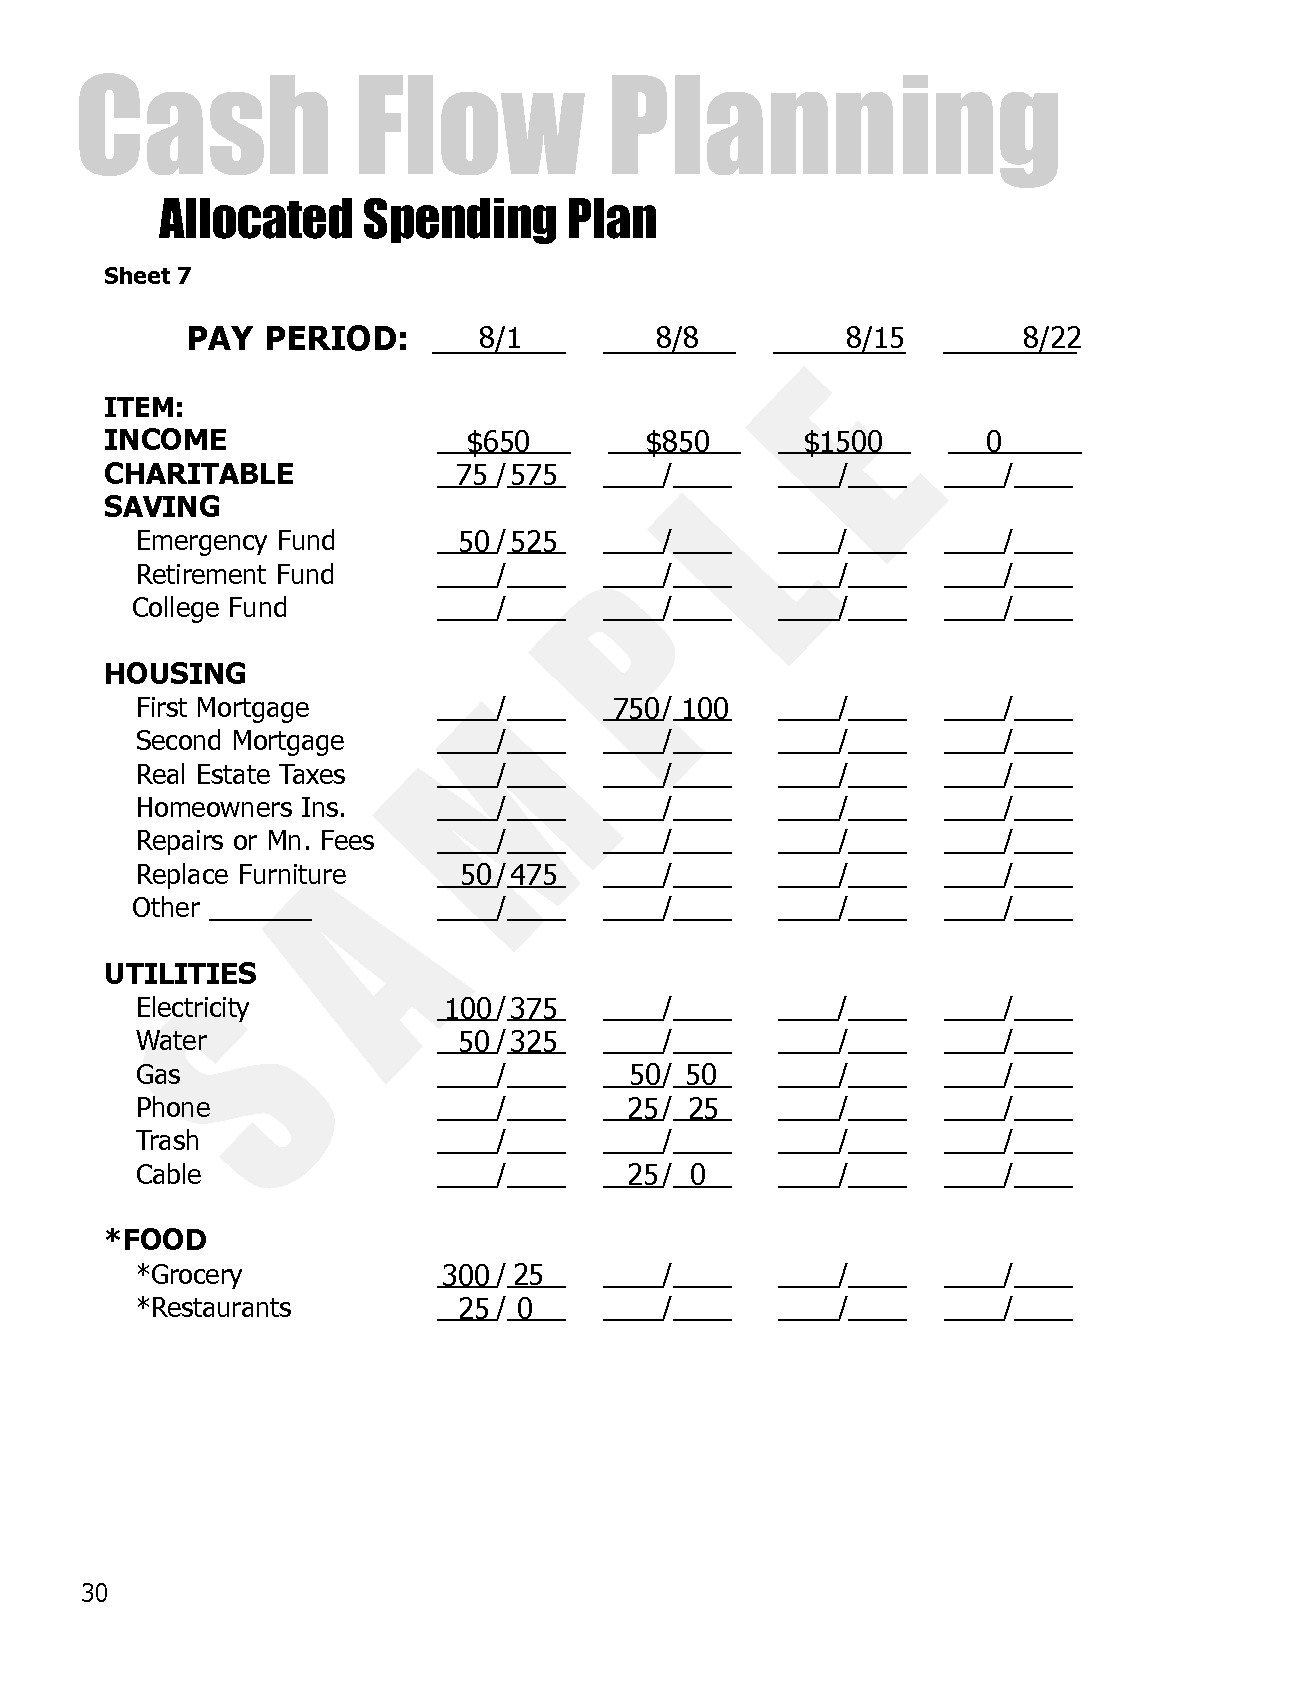 How To Use Dave Ramsey S Allocated Spending Plan Finance Document